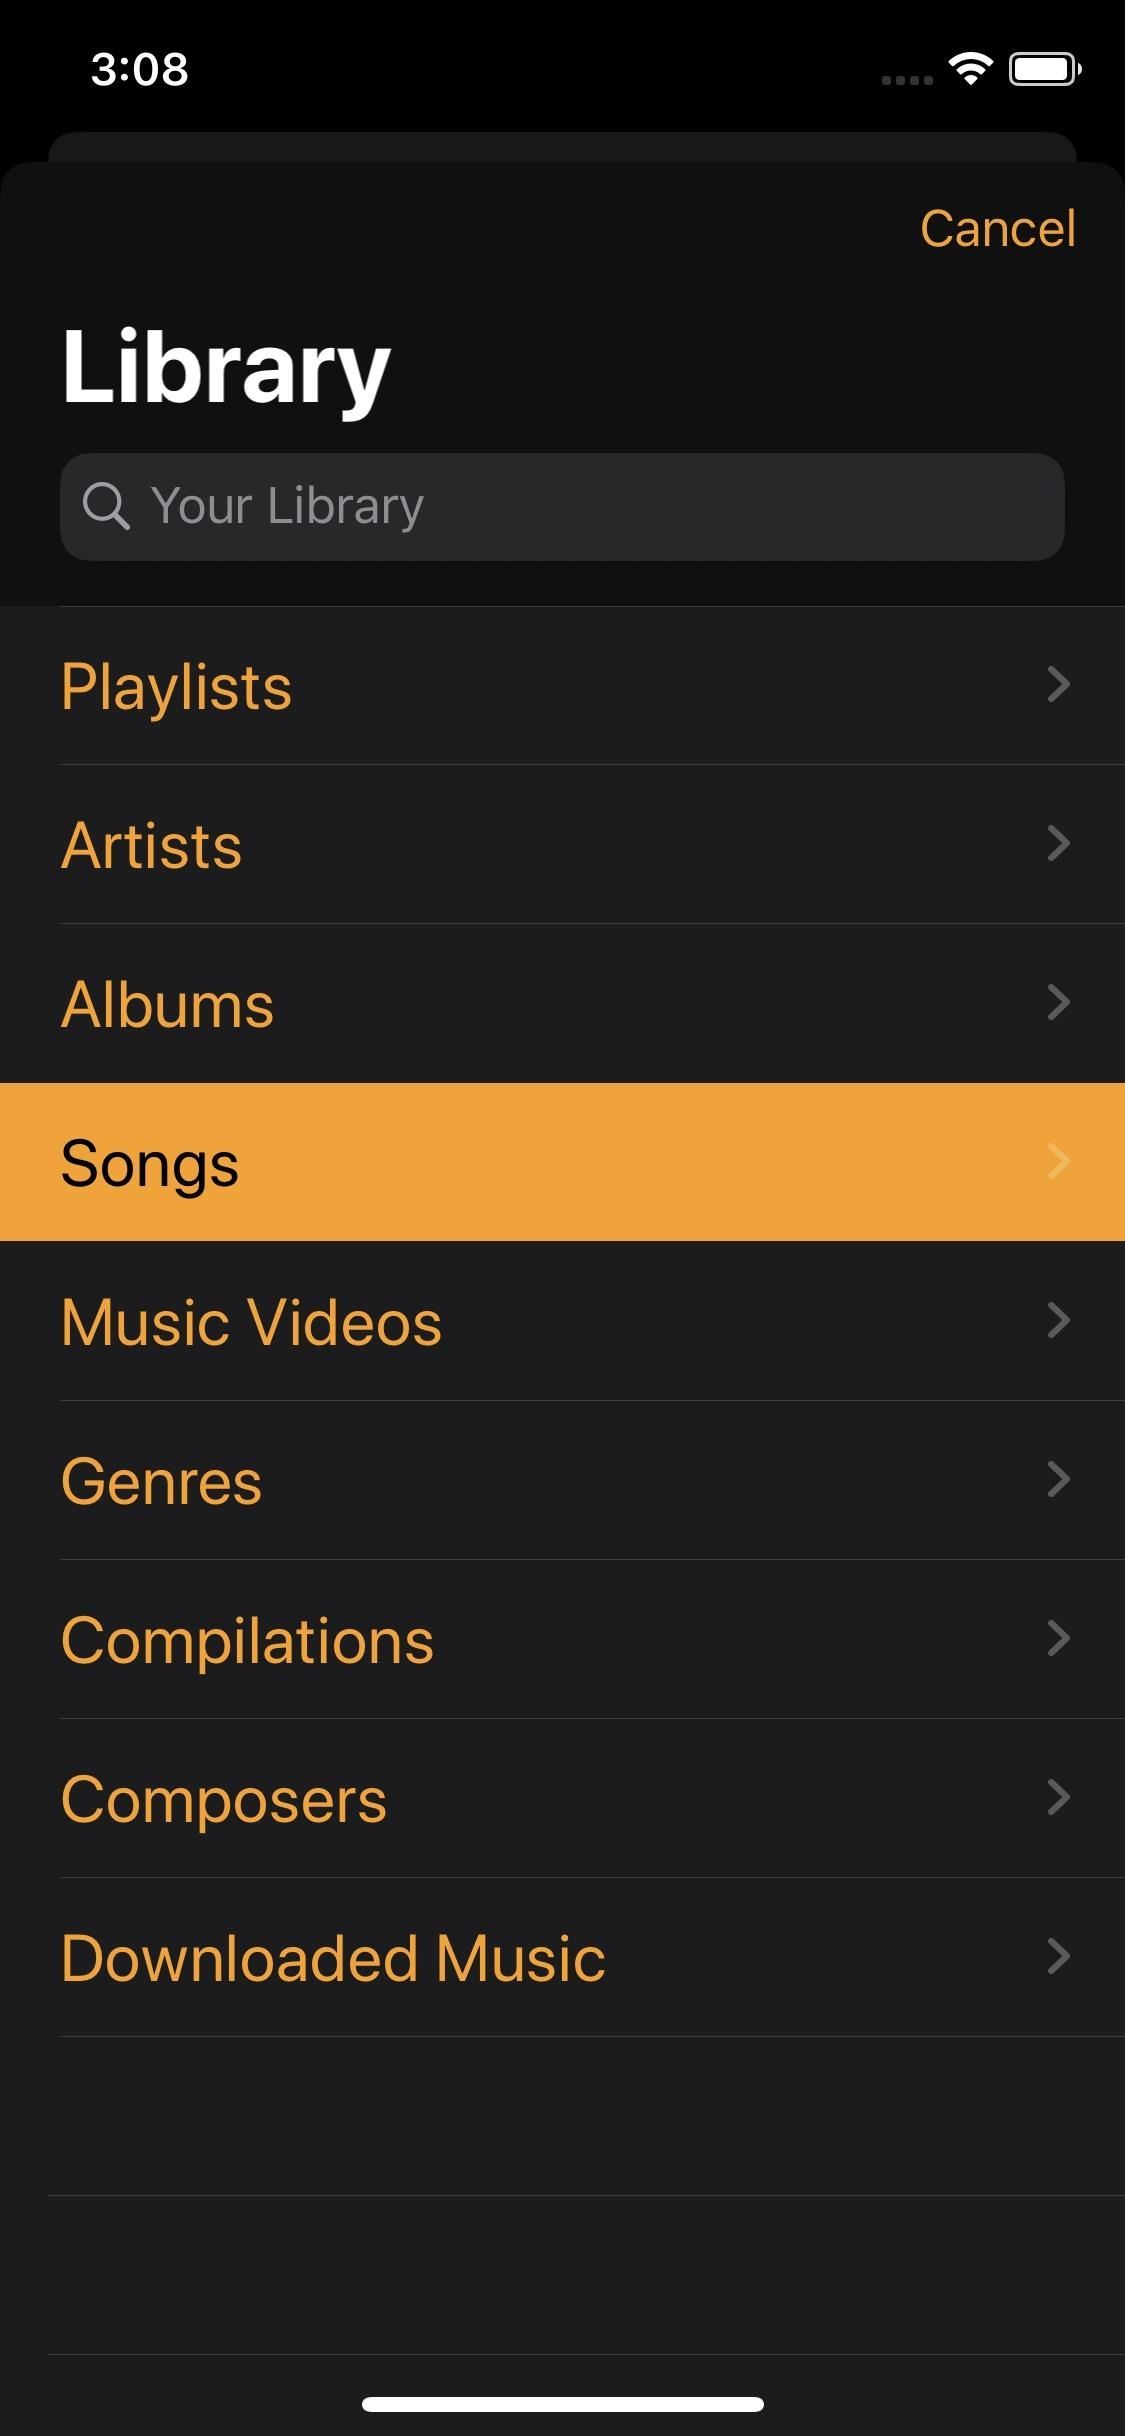 How to Set Apple Music Songs as Alarm Sounds on Your iPhone So You Don't Hit Snooze Anymore